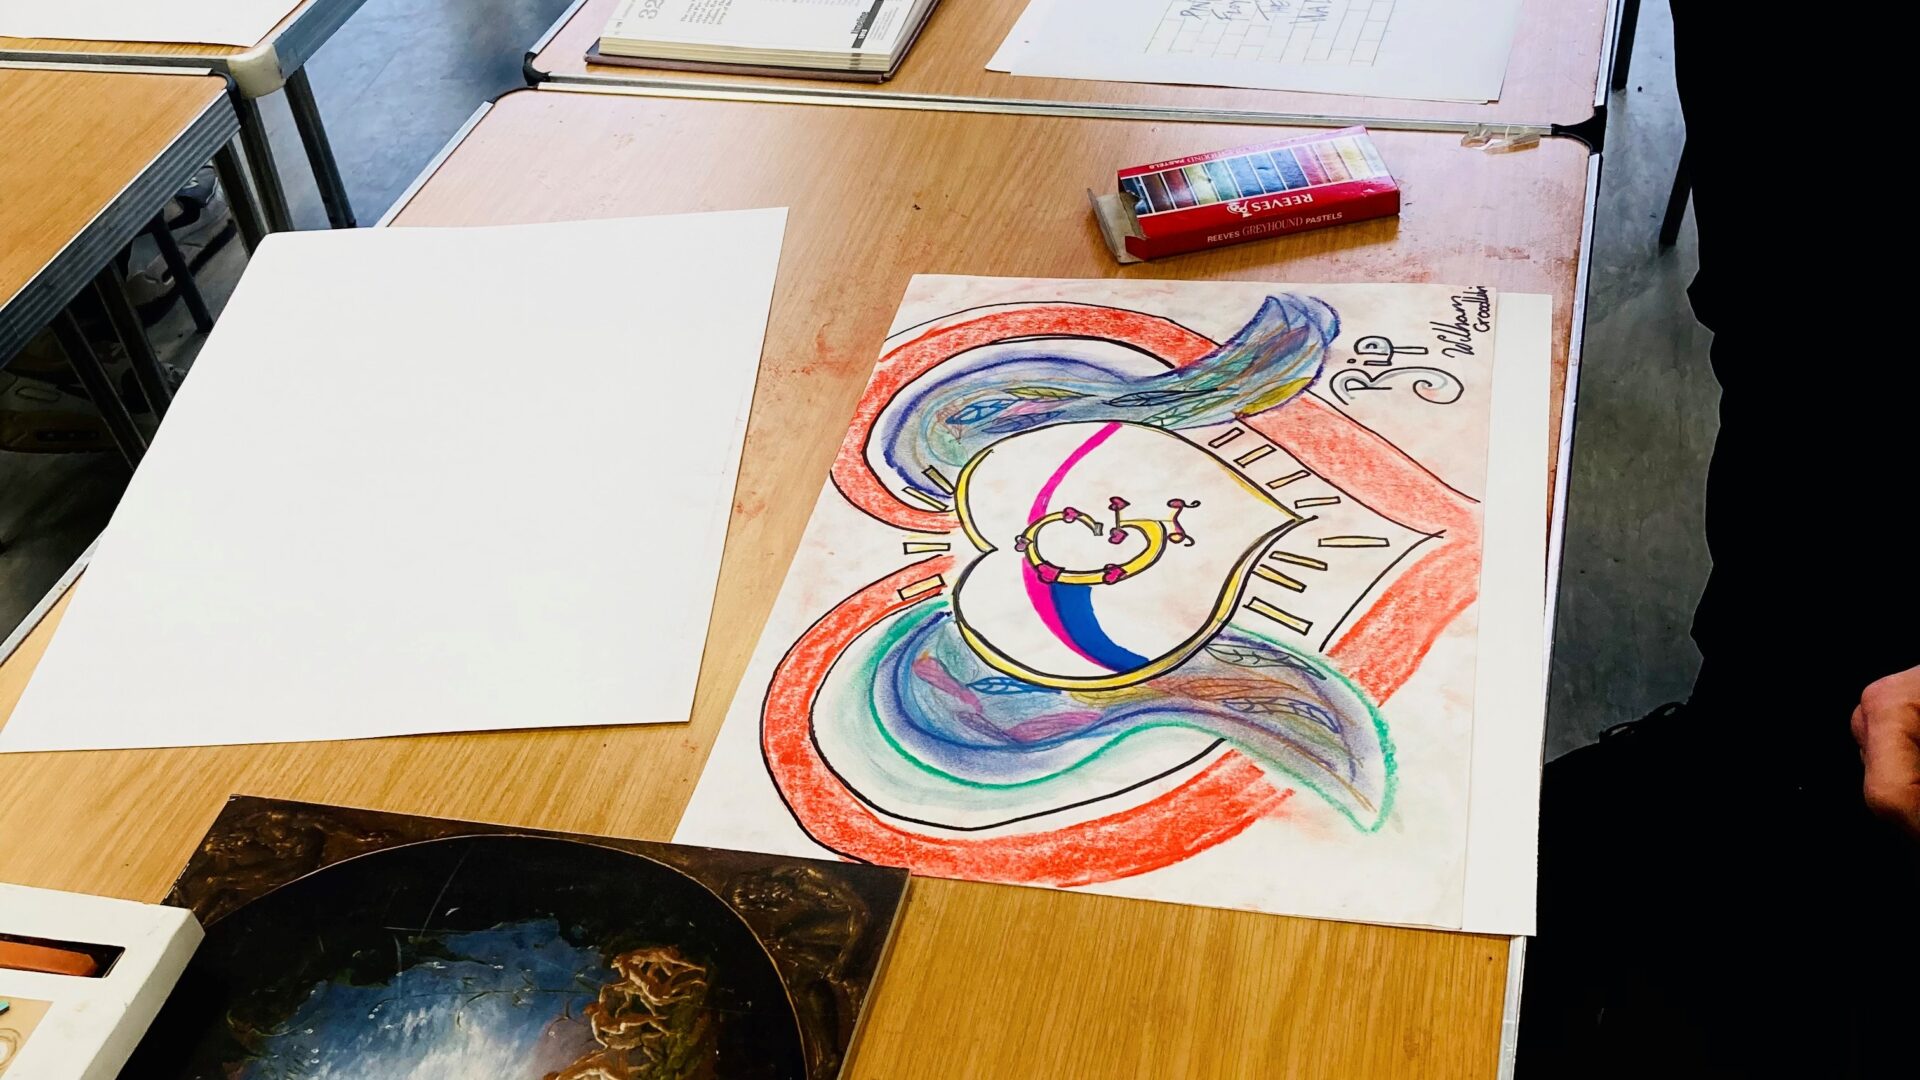 Image of artwork and paints on a table